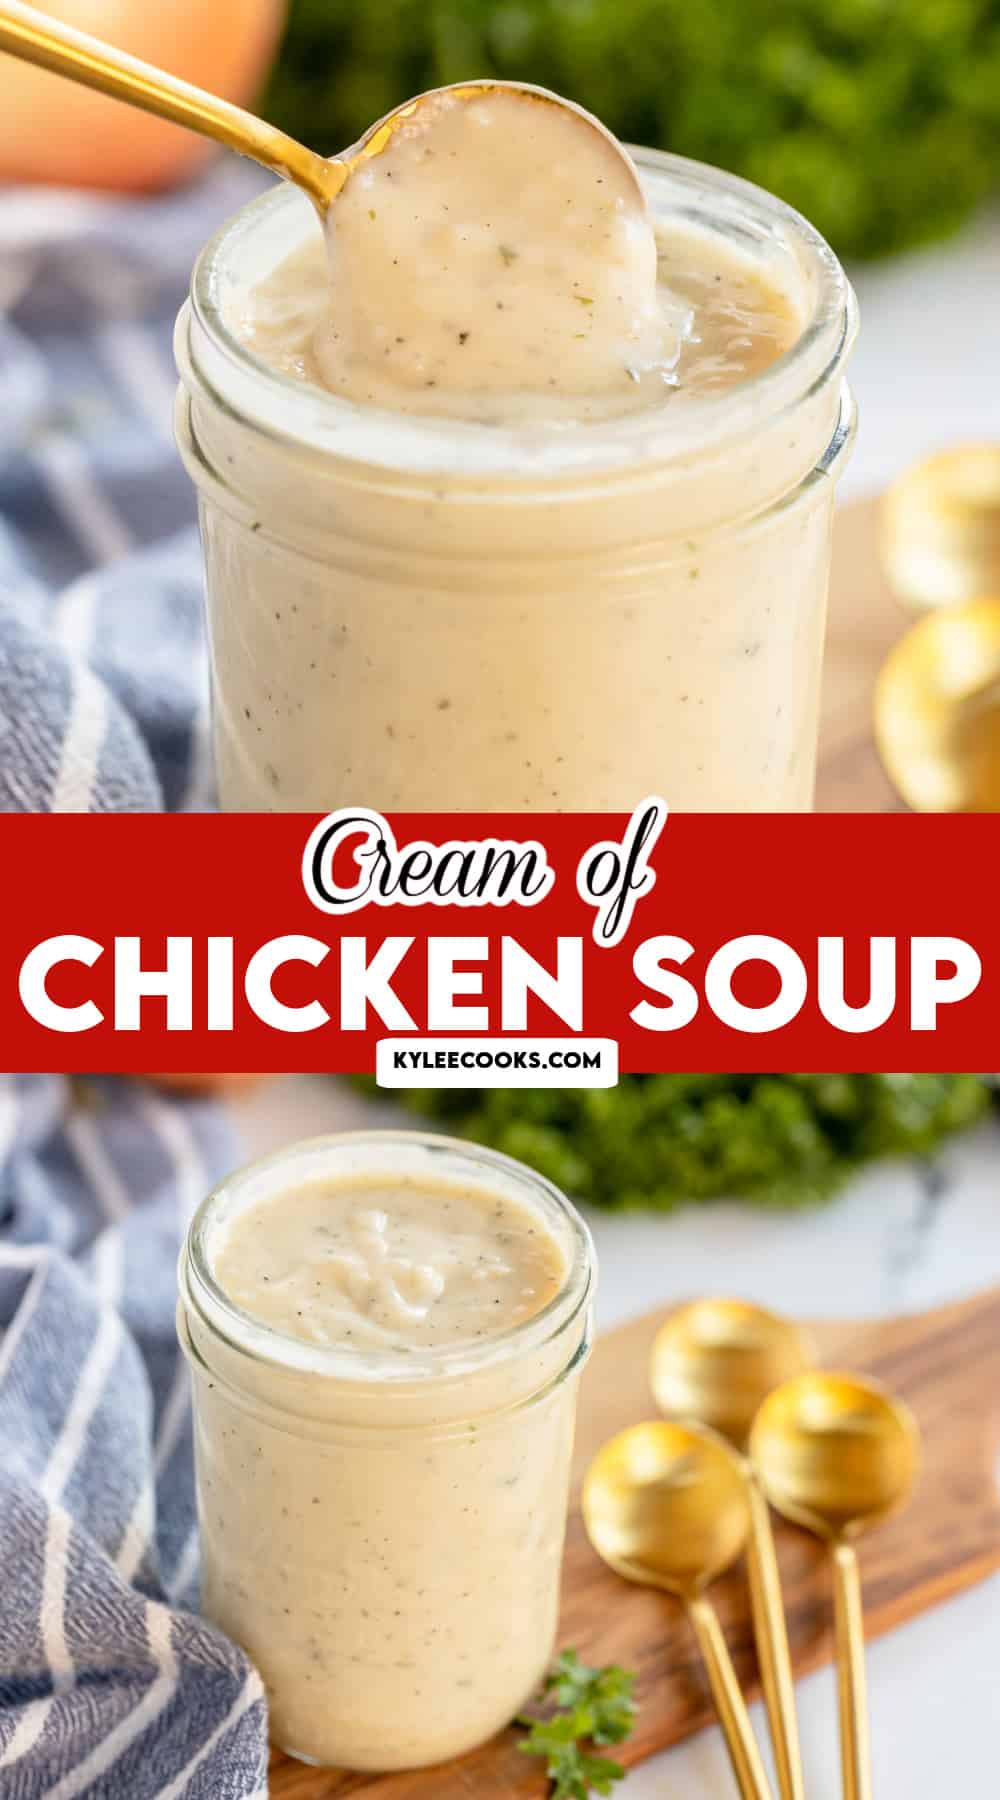 collage of homemade cream of chicken soup with text overlay that says cream of chicken soup.